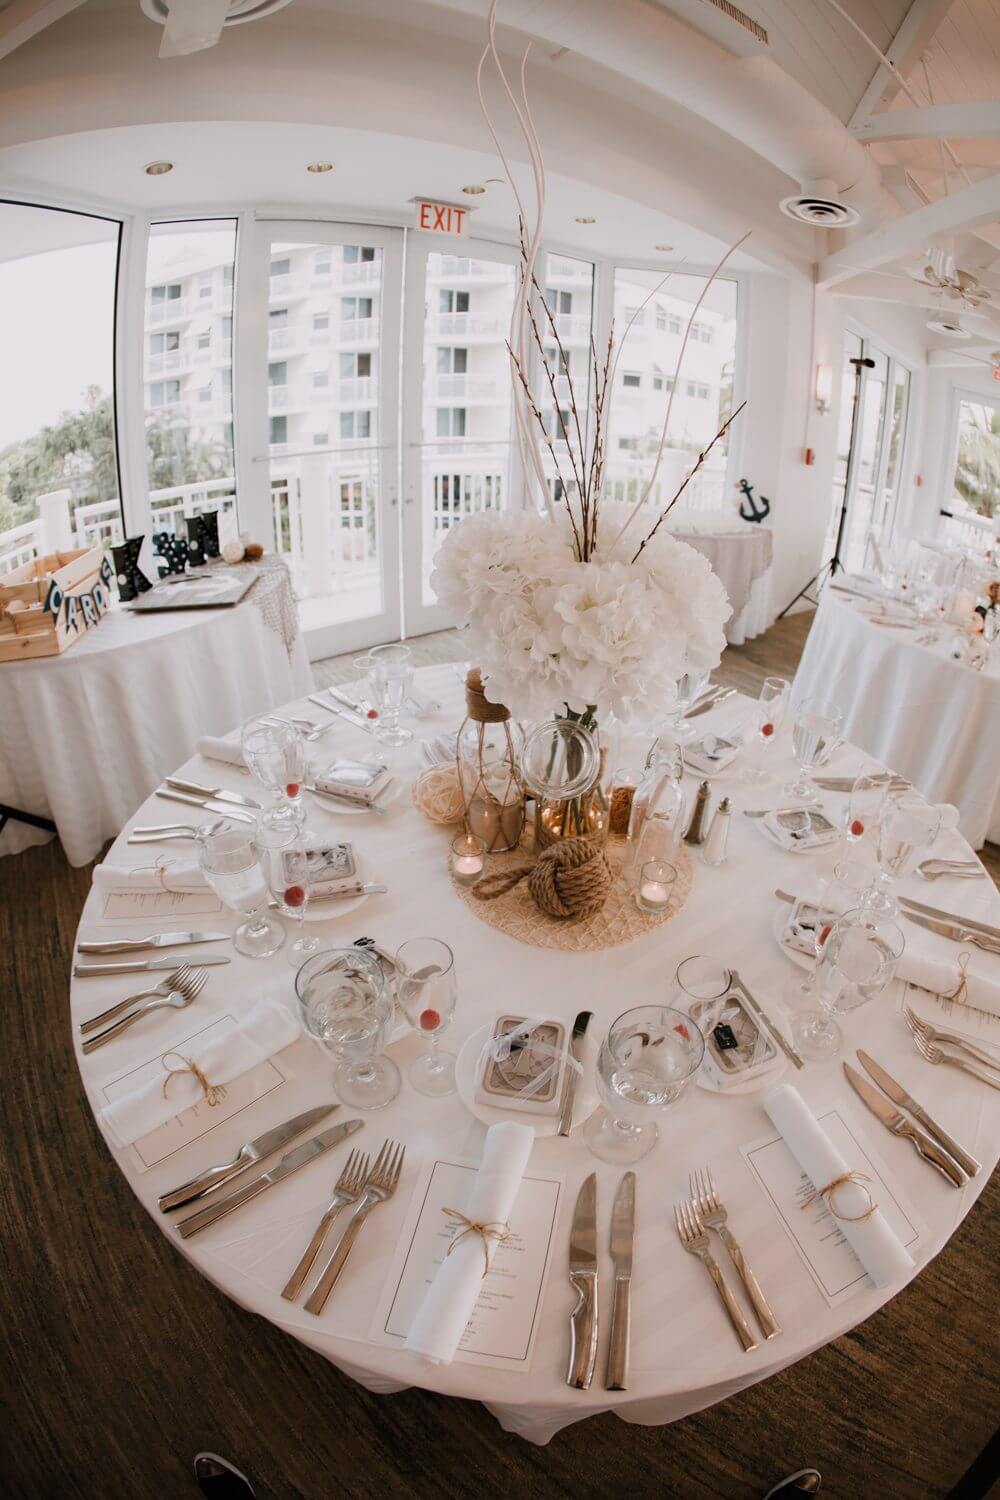 A Key West wedding reception table set up with white linens and silverware.